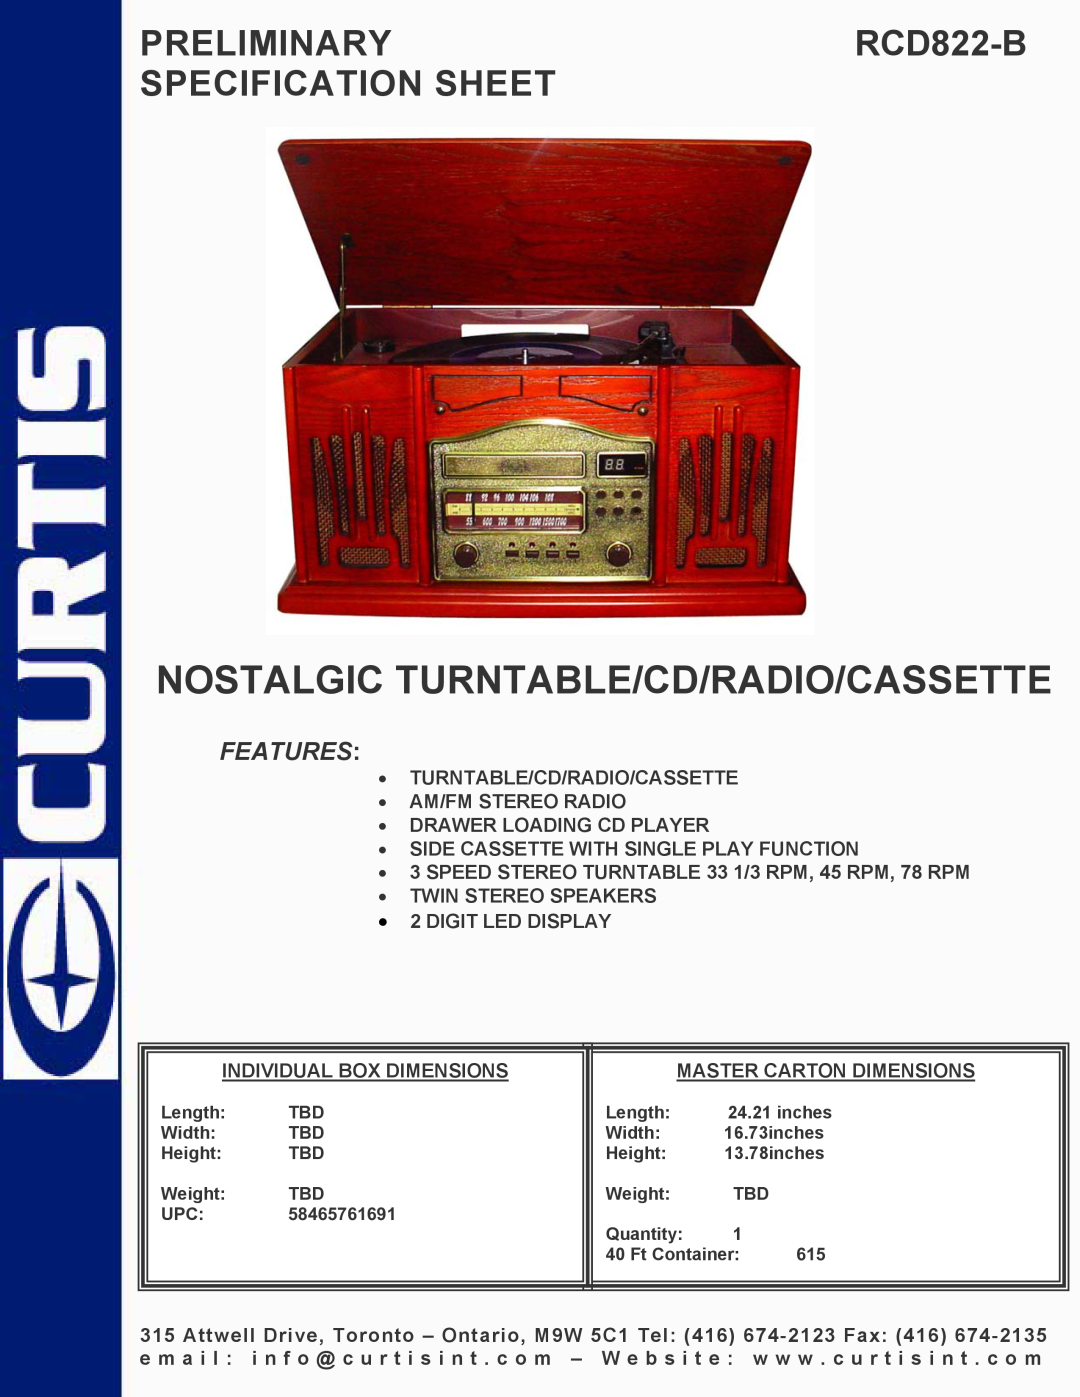 Curtis specifications Nostalgic Turntable/Cd/Radio/Cassette, PRELIMINARYRCD822-B SPECIFICATION SHEET, Features 